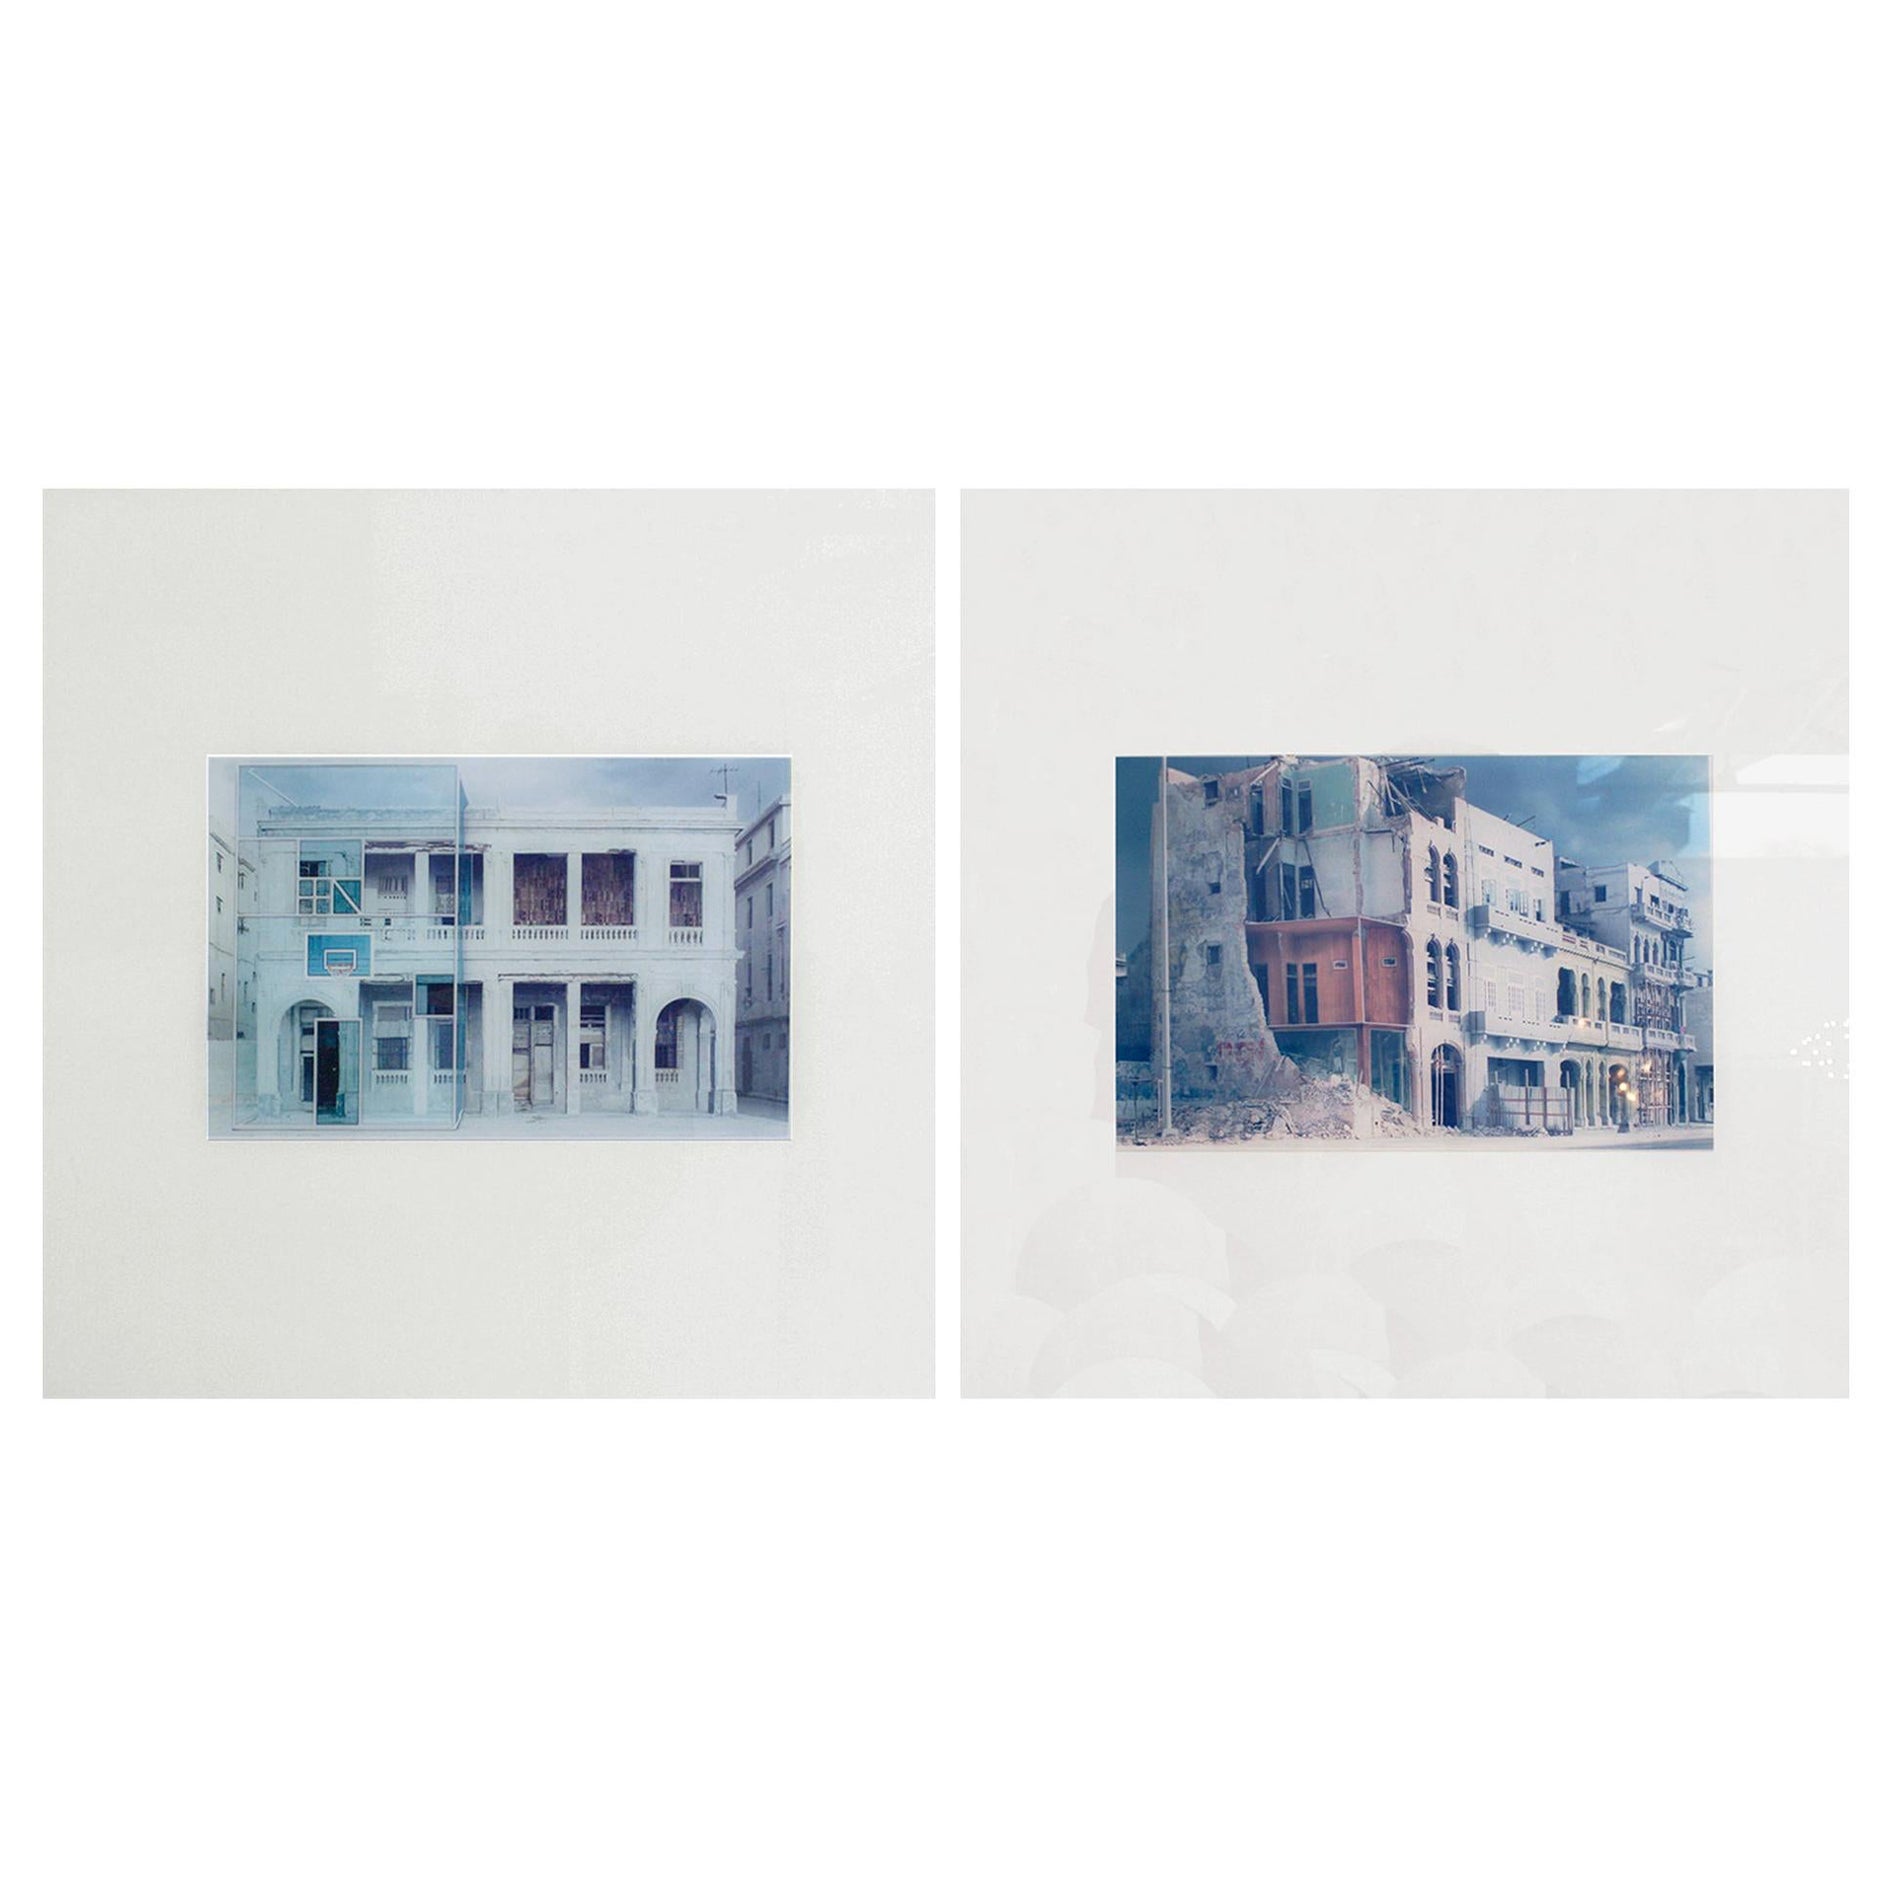 Contemporary Photography "Situ-Acciones II & III" by Dionisio González 2001 For Sale